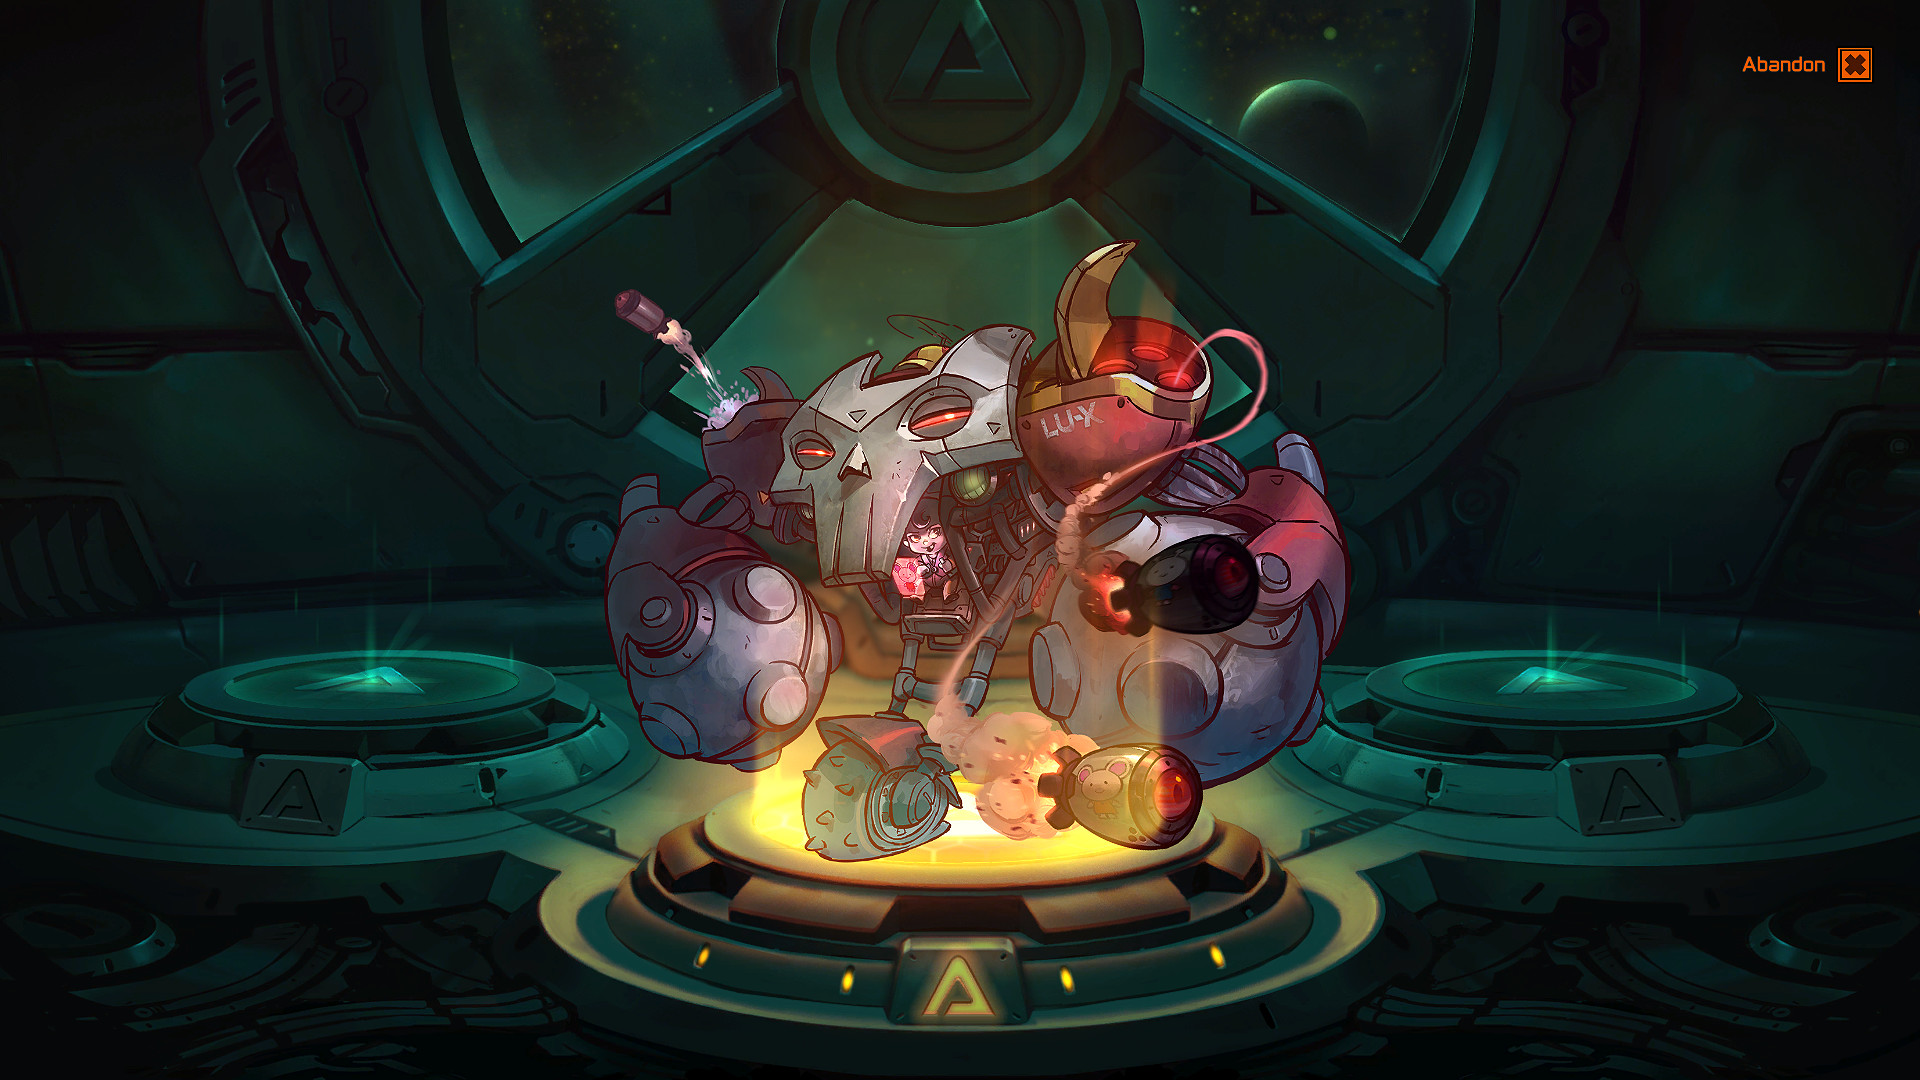 Jimmy and the LUX5000 - Awesomenauts Character screenshot